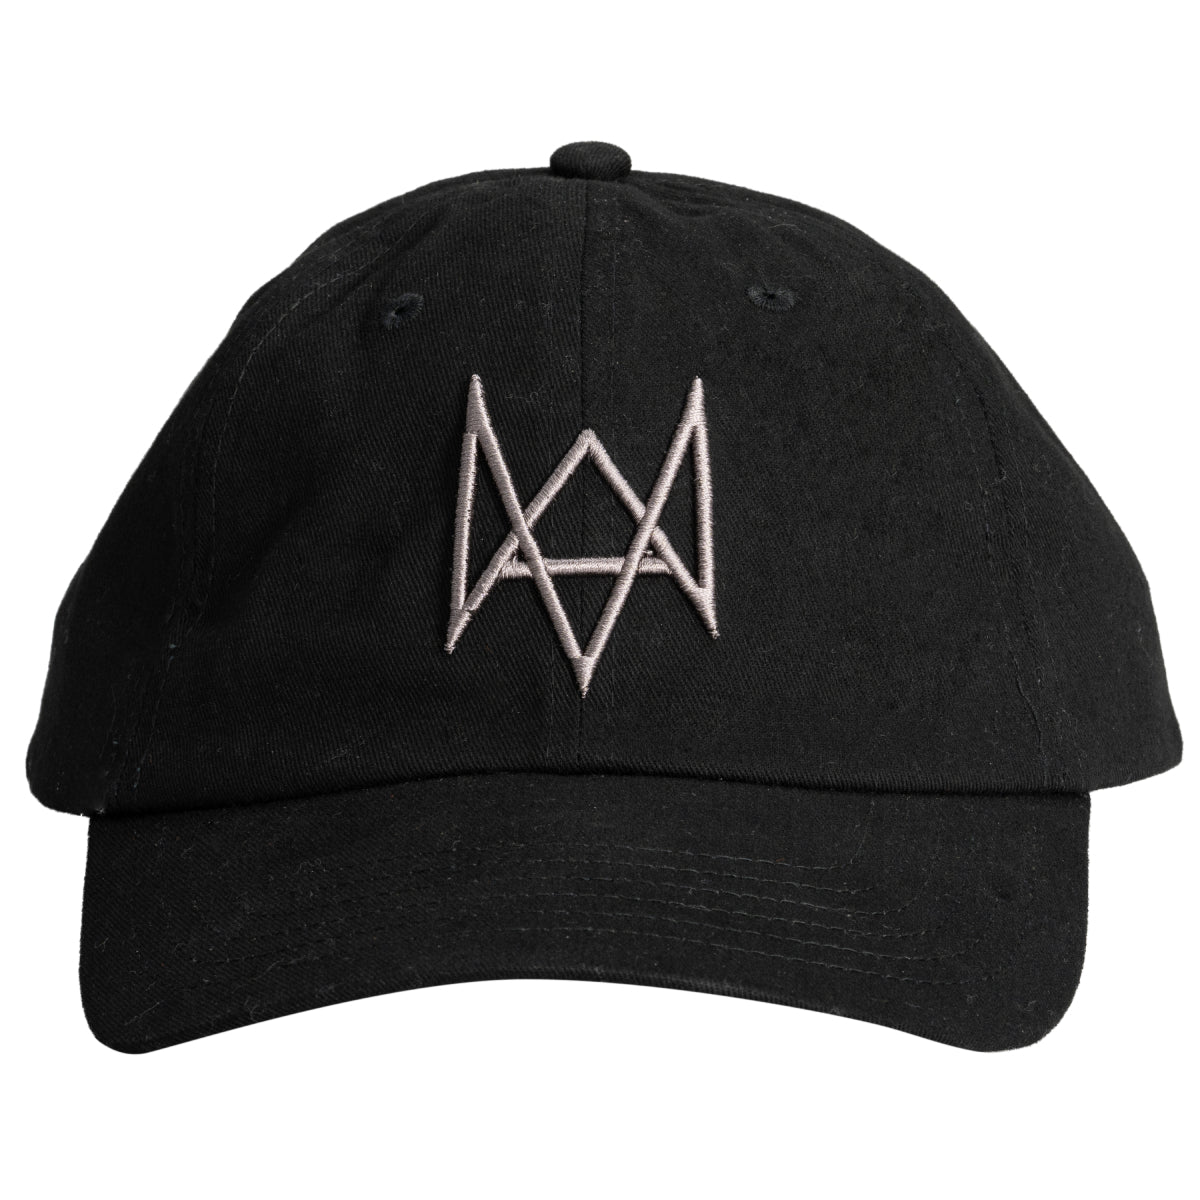 Watch Dogs Black Crown Hats Show Your Hacker Vigilante Style with the Logo and Symbol Baseball Cap